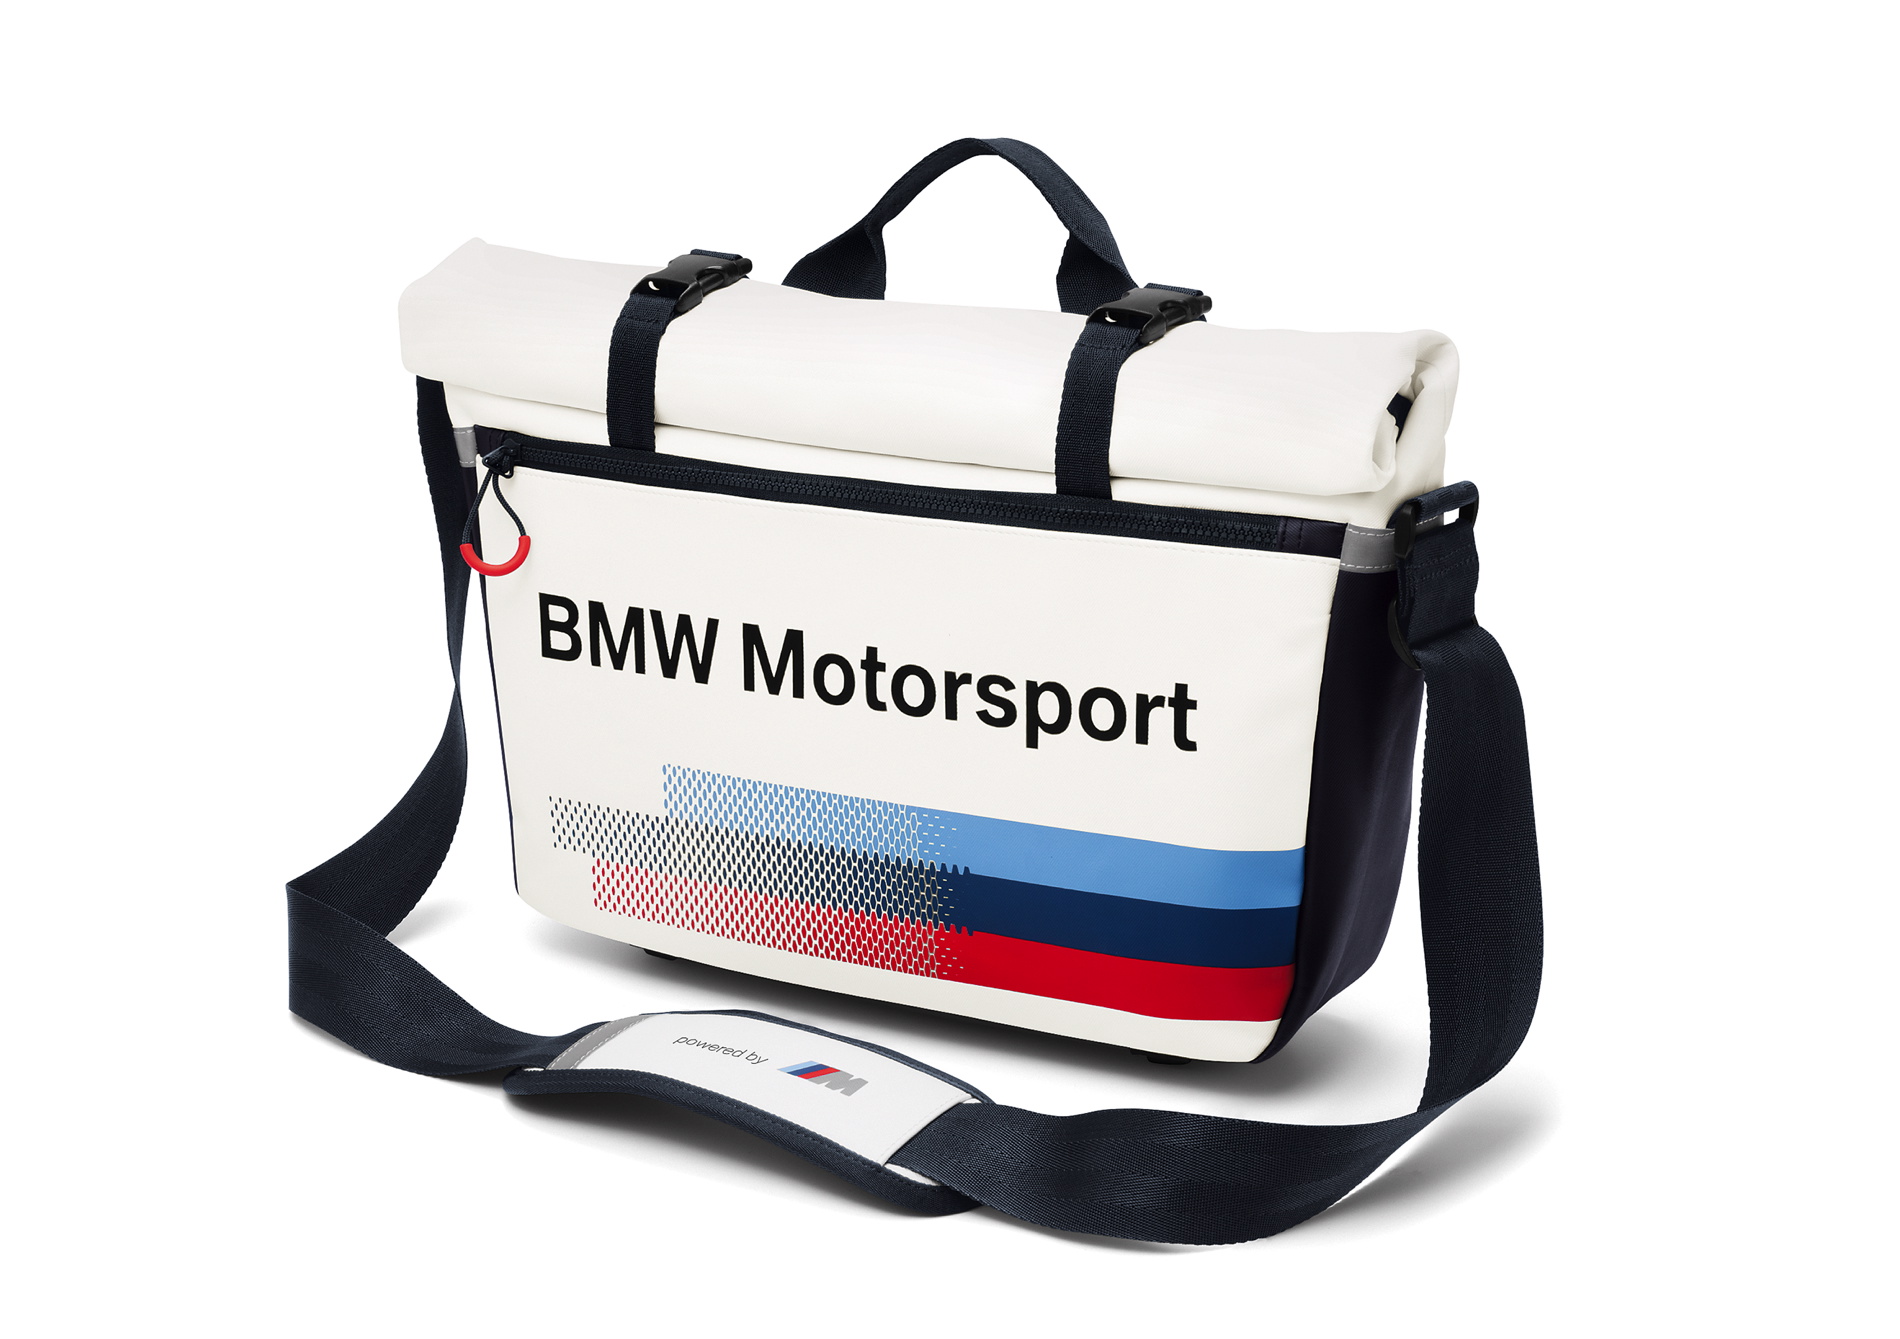 BMW Motorsport Heritage Collection now available - BMWFiend.com